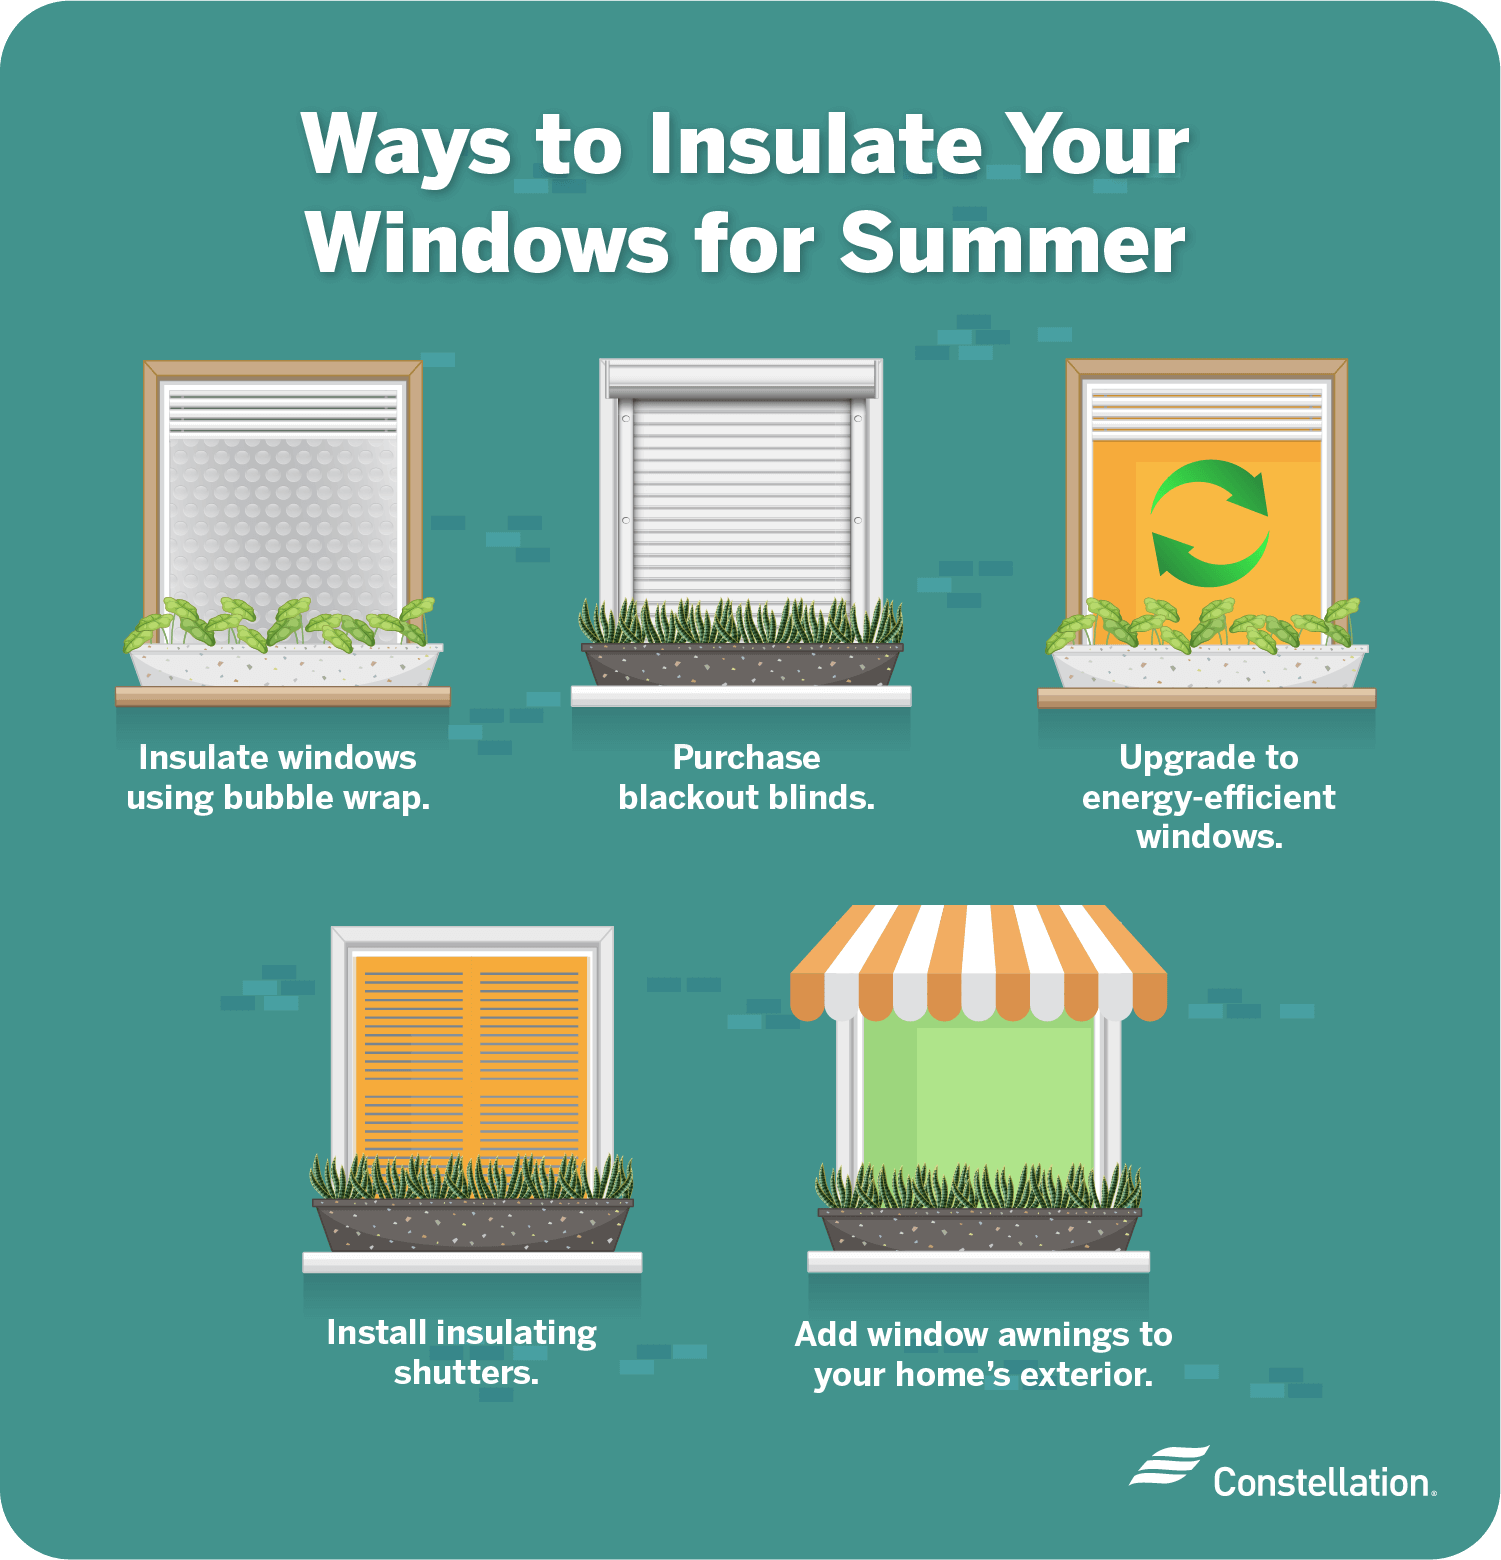 Ways to insulate your windows for summer.